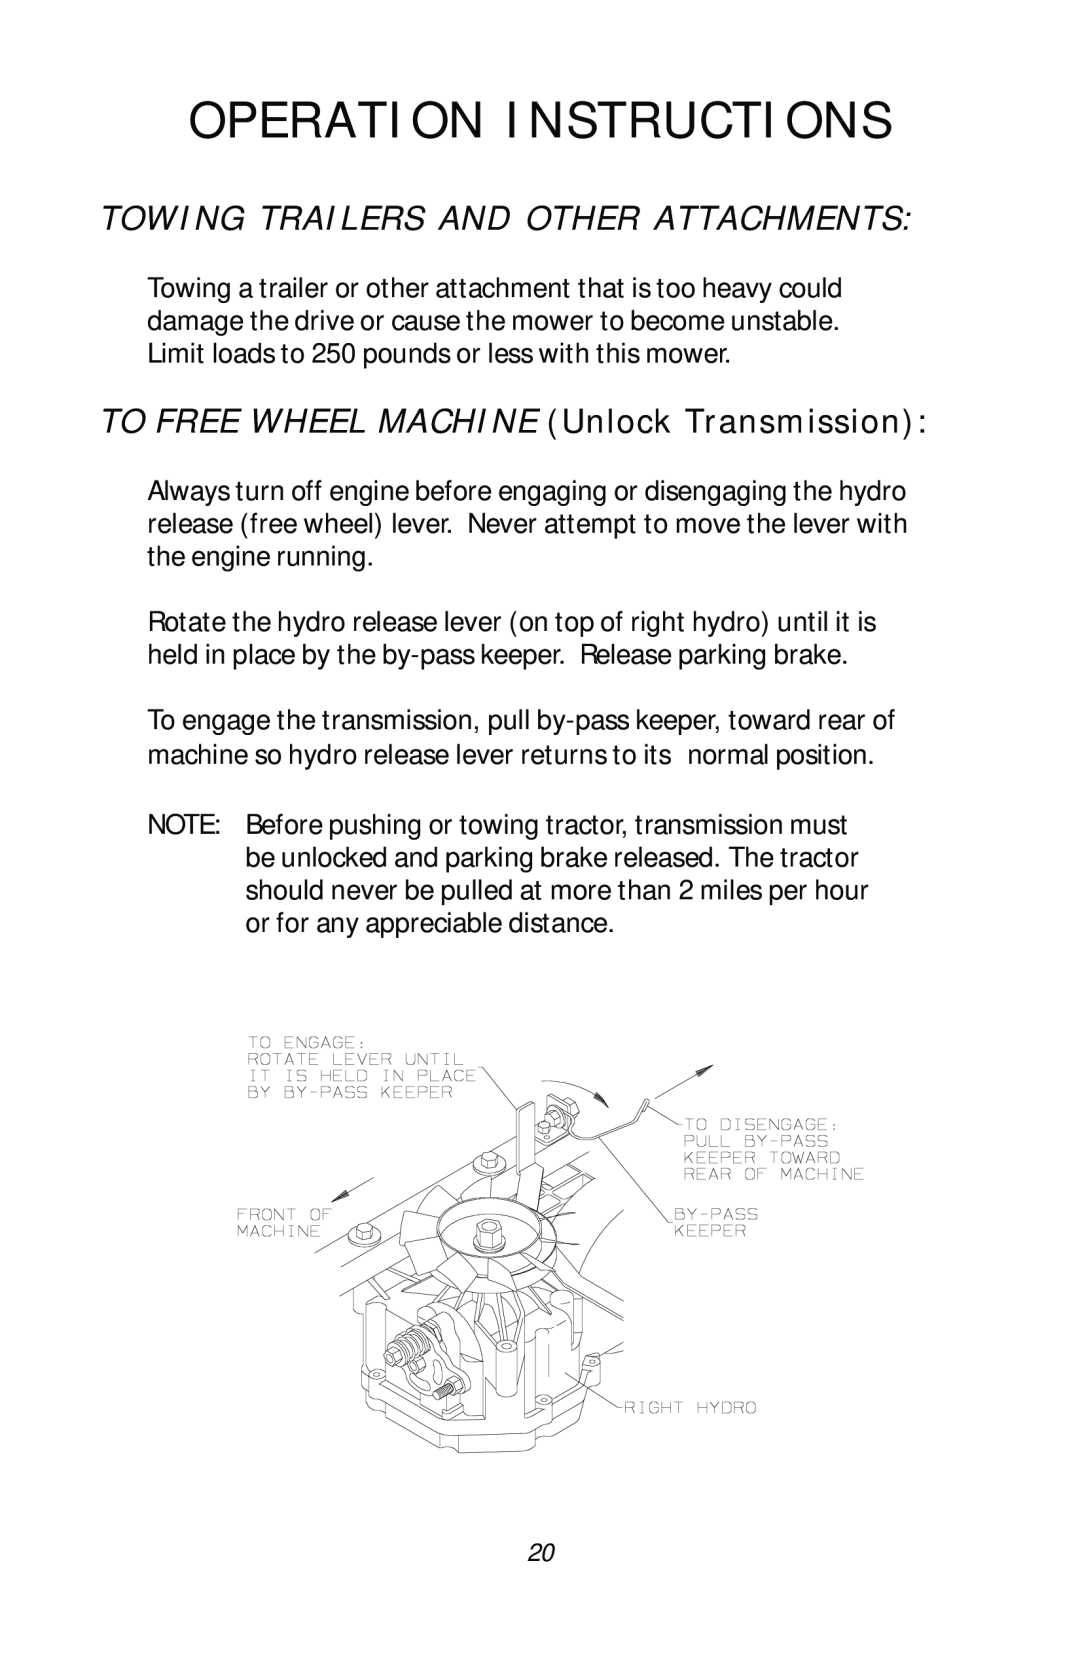 Dixon ZTR 4516 Operation Instructions, Towing Trailers And Other Attachments, TO FREE WHEEL MACHINE Unlock Transmission 